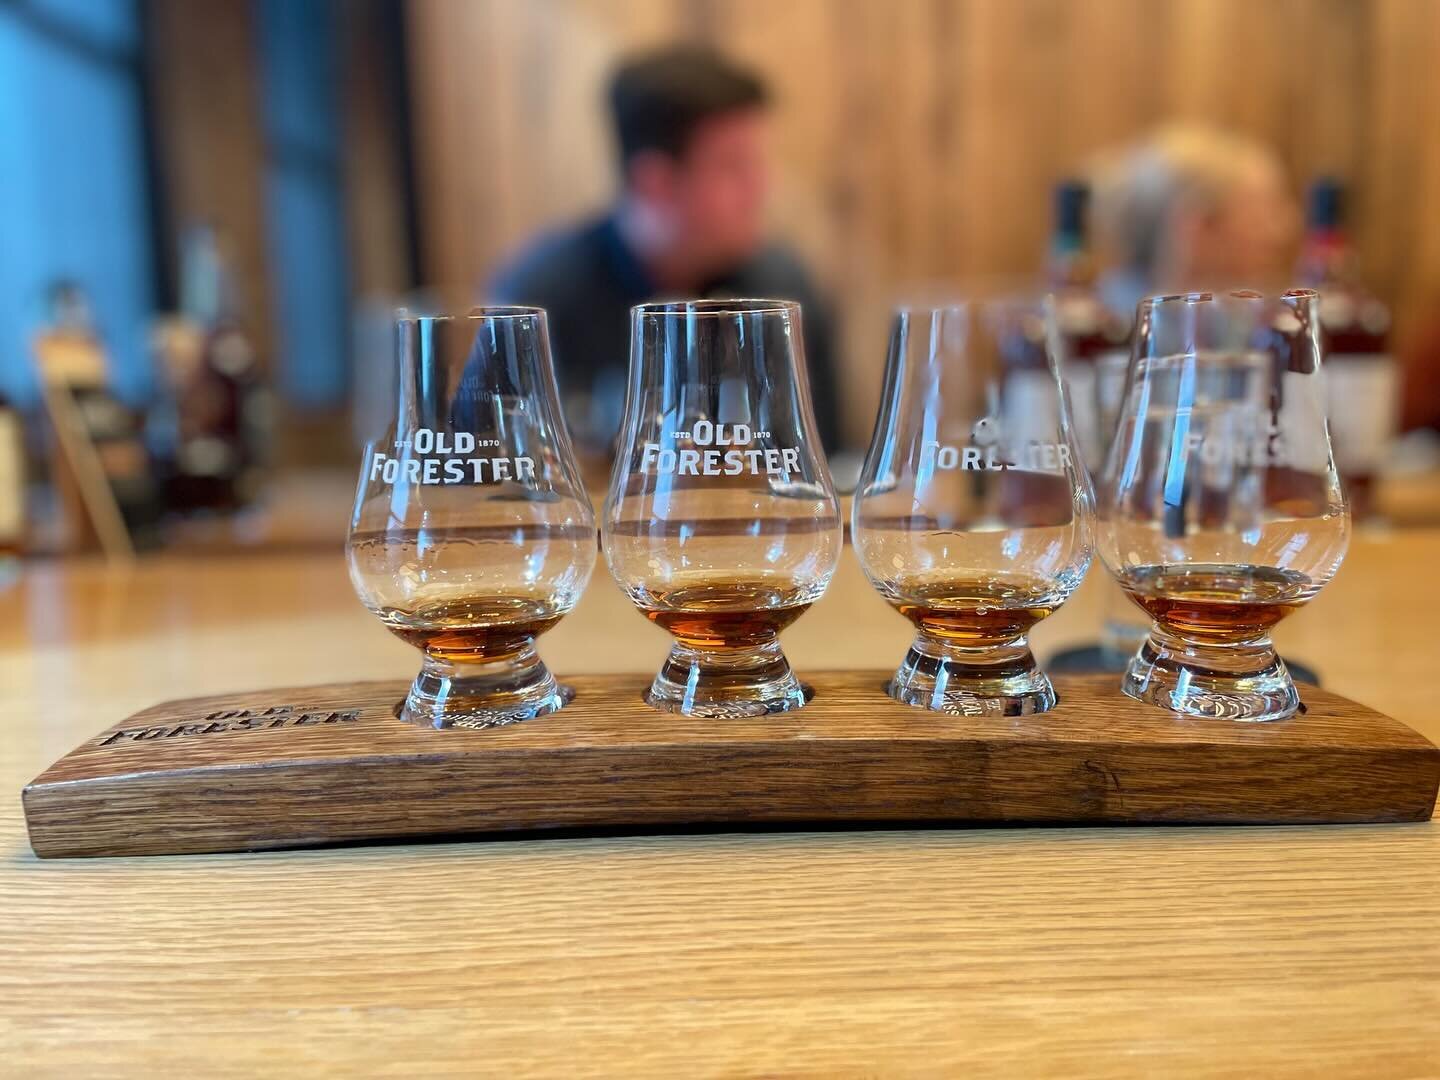 Another amazing tasting. Thanks Old Forester!
#kentuckybourbontrail #bourbon #bourbon-whiskey #liquidgold #bourbongram #whiskey #whisky #whiskeyandwatches
#oldforester